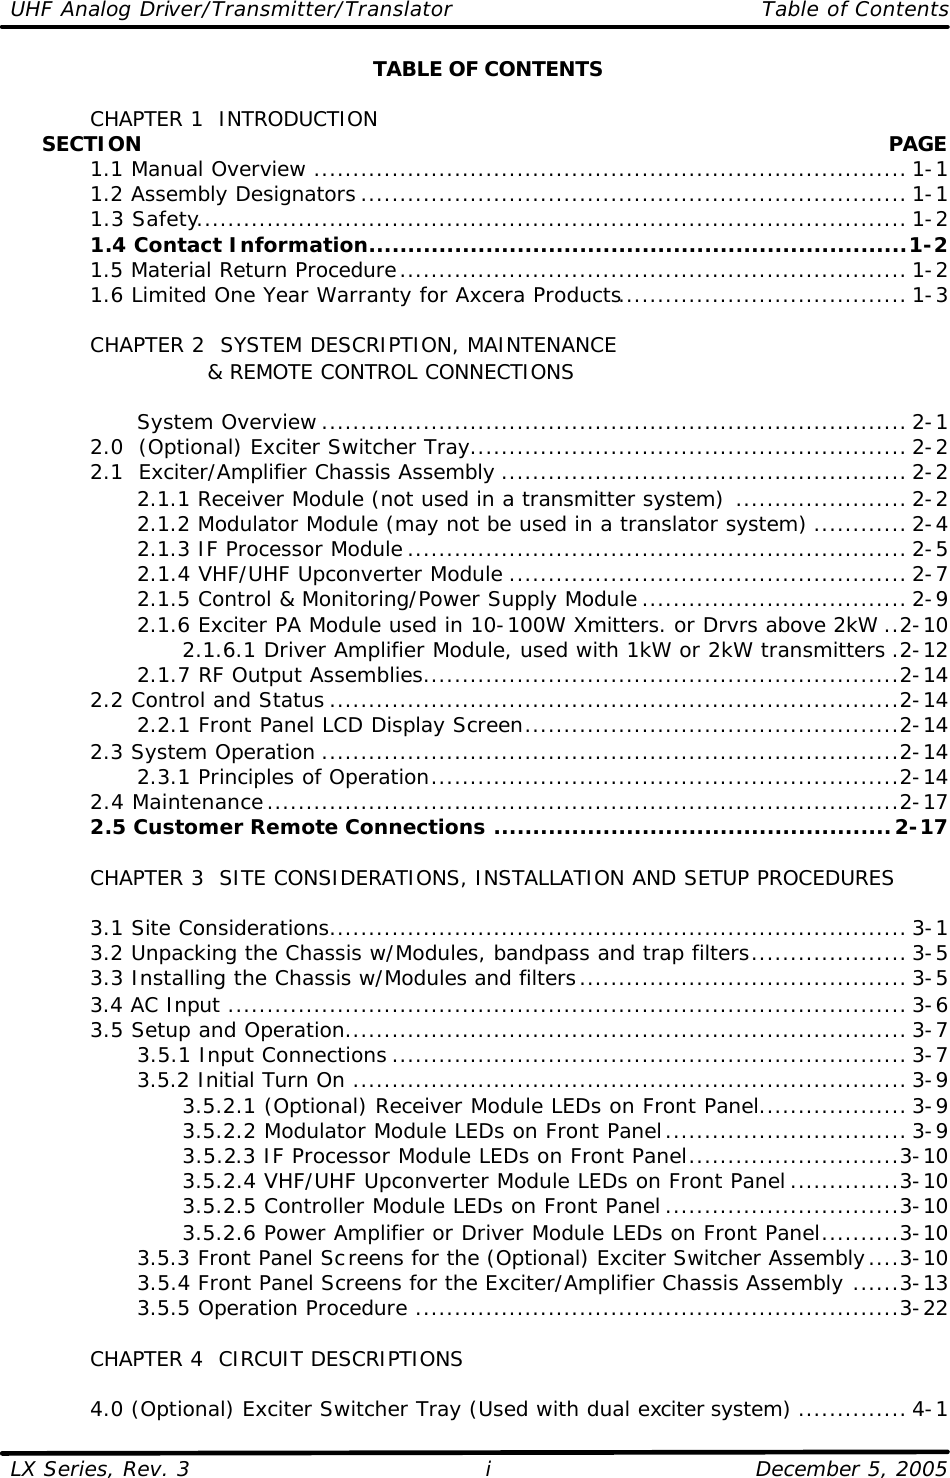 UHF Analog Driver/Transmitter/Translator   Table of Contents  LX Series, Rev. 3    December 5, 2005 i TABLE OF CONTENTS   CHAPTER 1  INTRODUCTION      SECTION    PAGE  1.1 Manual Overview ............................................................................ 1-1  1.2 Assembly Designators ...................................................................... 1-1  1.3 Safety........................................................................................... 1-2  1.4 Contact Information.....................................................................1-2  1.5 Material Return Procedure................................................................. 1-2  1.6 Limited One Year Warranty for Axcera Products..................................... 1-3   CHAPTER 2  SYSTEM DESCRIPTION, MAINTENANCE              &amp; REMOTE CONTROL CONNECTIONS      System Overview ........................................................................... 2-1  2.0  (Optional) Exciter Switcher Tray........................................................ 2-2  2.1  Exciter/Amplifier Chassis Assembly .................................................... 2-2     2.1.1 Receiver Module (not used in a transmitter system) ...................... 2-2     2.1.2 Modulator Module (may not be used in a translator system) ............ 2-4     2.1.3 IF Processor Module ................................................................ 2-5     2.1.4 VHF/UHF Upconverter Module ................................................... 2-7     2.1.5 Control &amp; Monitoring/Power Supply Module .................................. 2-9     2.1.6 Exciter PA Module used in 10-100W Xmitters. or Drvrs above 2kW ..2-10       2.1.6.1 Driver Amplifier Module, used with 1kW or 2kW transmitters .2-12     2.1.7 RF Output Assemblies.............................................................2-14  2.2 Control and Status .........................................................................2-14     2.2.1 Front Panel LCD Display Screen................................................2-14  2.3 System Operation ..........................................................................2-14     2.3.1 Principles of Operation............................................................2-14  2.4 Maintenance.................................................................................2-17  2.5 Customer Remote Connections ...................................................2-17   CHAPTER 3  SITE CONSIDERATIONS, INSTALLATION AND SETUP PROCEDURES     3.1 Site Considerations.......................................................................... 3-1  3.2 Unpacking the Chassis w/Modules, bandpass and trap filters.................... 3-5  3.3 Installing the Chassis w/Modules and filters.......................................... 3-5  3.4 AC Input ....................................................................................... 3-6  3.5 Setup and Operation........................................................................ 3-7     3.5.1 Input Connections .................................................................. 3-7     3.5.2 Initial Turn On ....................................................................... 3-9       3.5.2.1 (Optional) Receiver Module LEDs on Front Panel................... 3-9       3.5.2.2 Modulator Module LEDs on Front Panel............................... 3-9       3.5.2.3 IF Processor Module LEDs on Front Panel...........................3-10       3.5.2.4 VHF/UHF Upconverter Module LEDs on Front Panel ..............3-10       3.5.2.5 Controller Module LEDs on Front Panel ..............................3-10       3.5.2.6 Power Amplifier or Driver Module LEDs on Front Panel..........3-10     3.5.3 Front Panel Screens for the (Optional) Exciter Switcher Assembly....3-10     3.5.4 Front Panel Screens for the Exciter/Amplifier Chassis Assembly ......3-13     3.5.5 Operation Procedure ..............................................................3-22   CHAPTER 4  CIRCUIT DESCRIPTIONS   4.0 (Optional) Exciter Switcher Tray (Used with dual exciter system) .............. 4-1 